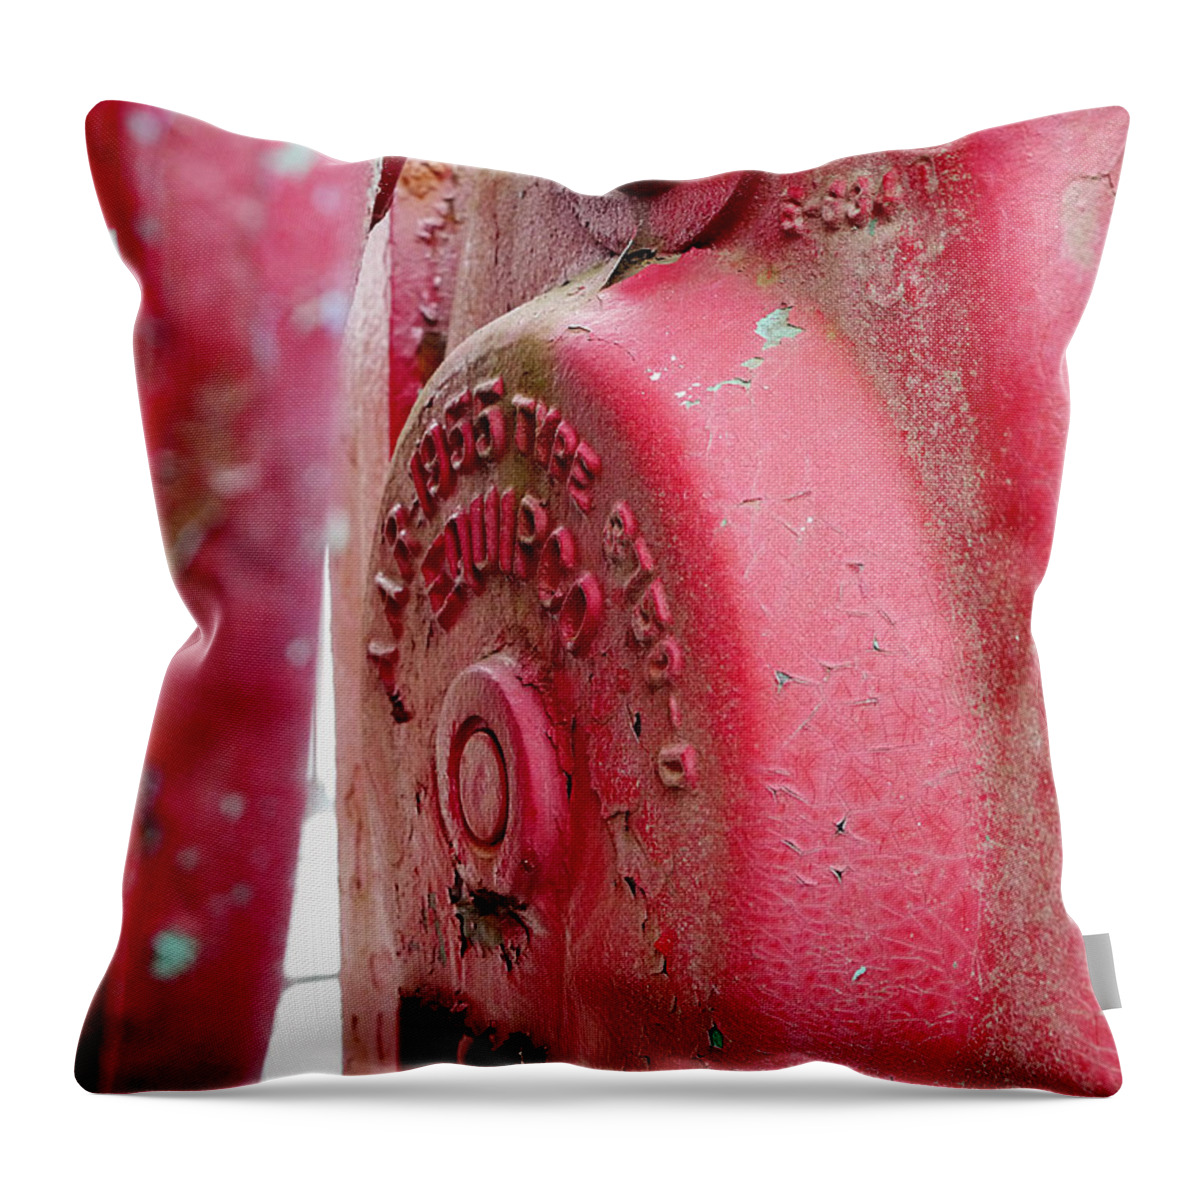 Richard Reeve Throw Pillow featuring the photograph Caboose Brake by Richard Reeve